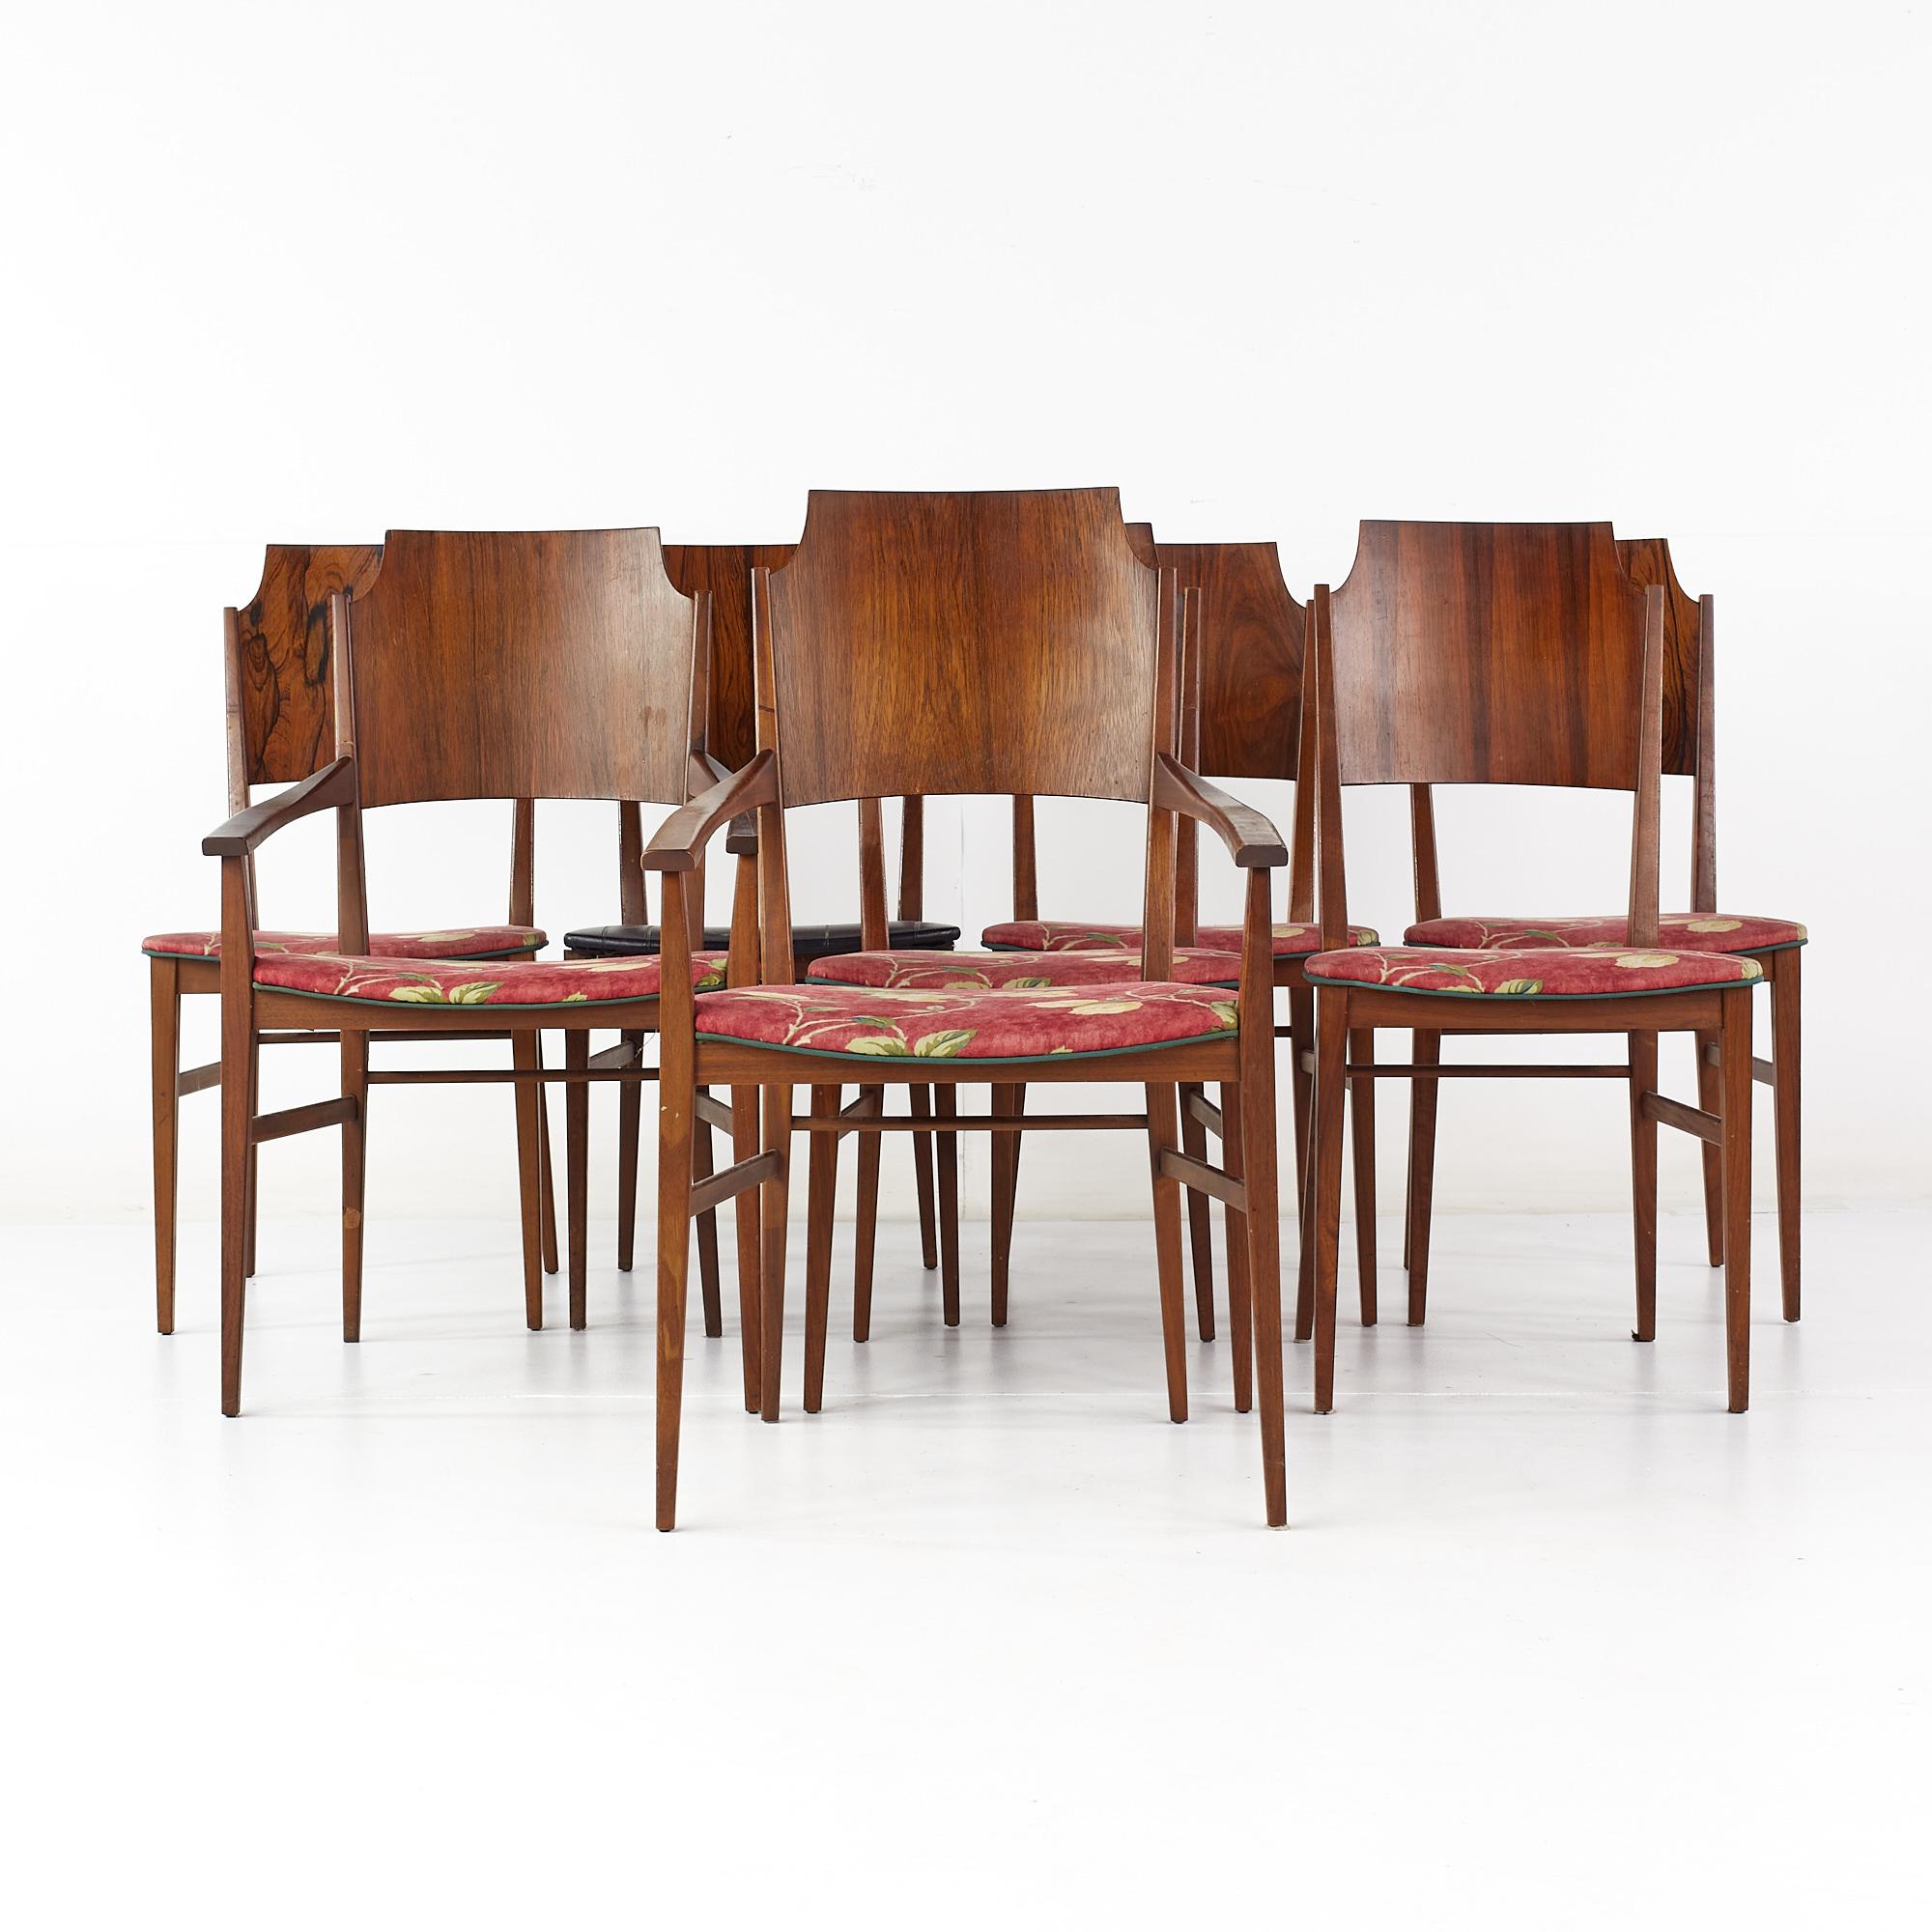 Paul McCobb for Lane Delineator Mid Century Rosewood Dining Chairs - Set of 8

Each armless chair measures: 18 wide x 18 deep x 36.25 high, with a seat height of 17.5 inches
Each captains chair measures: 22 wide x 19.5 deep x 36.75 high, with a seat